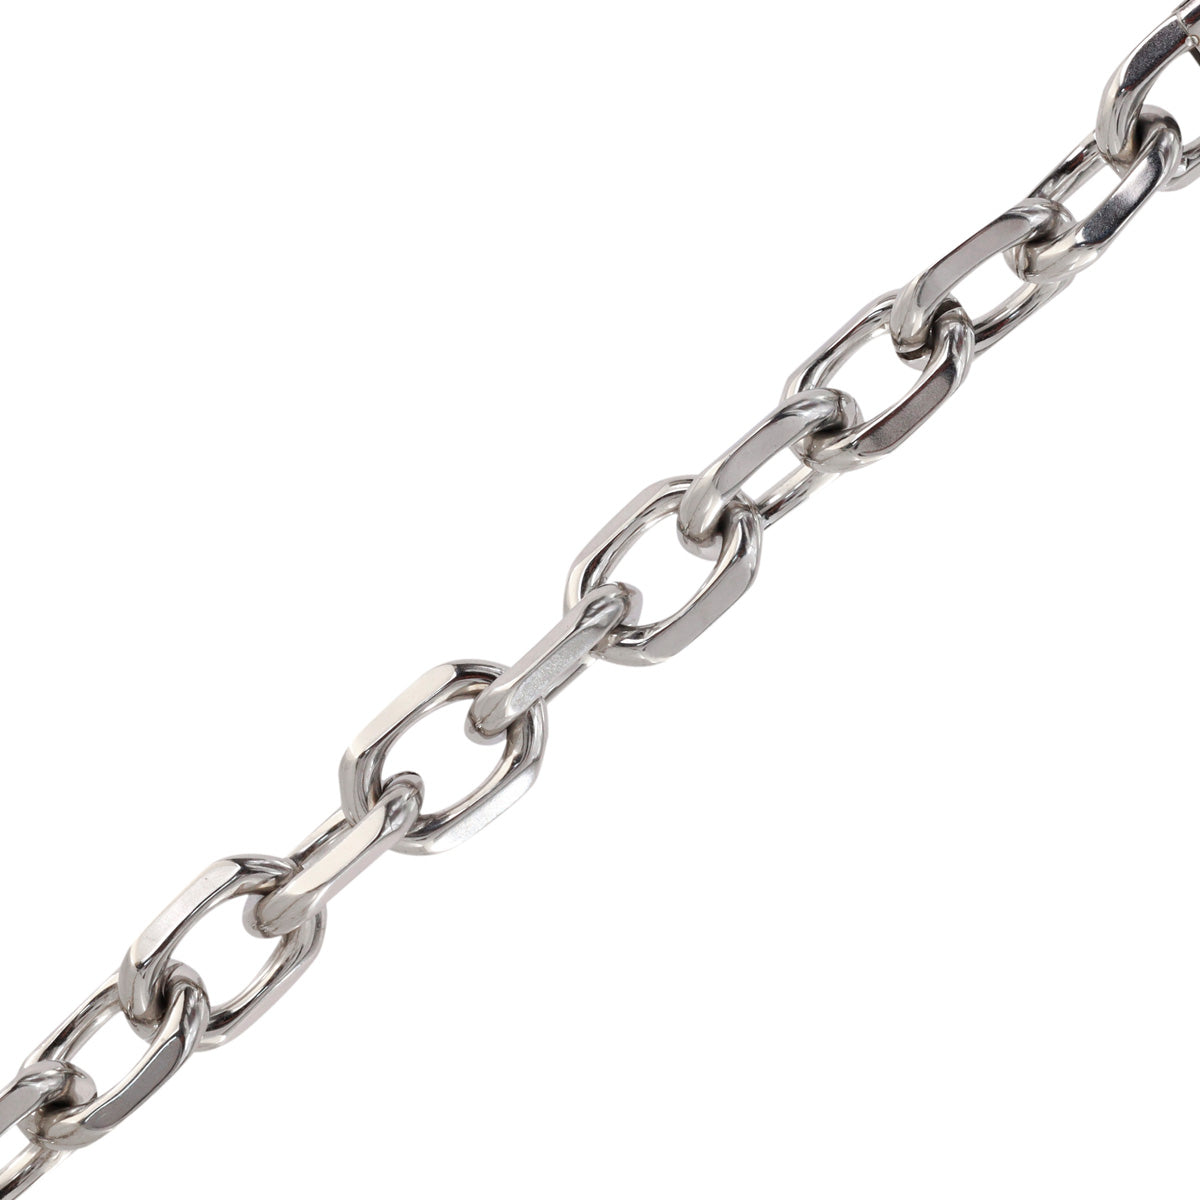 Steel cable chain necklace 45-50cm